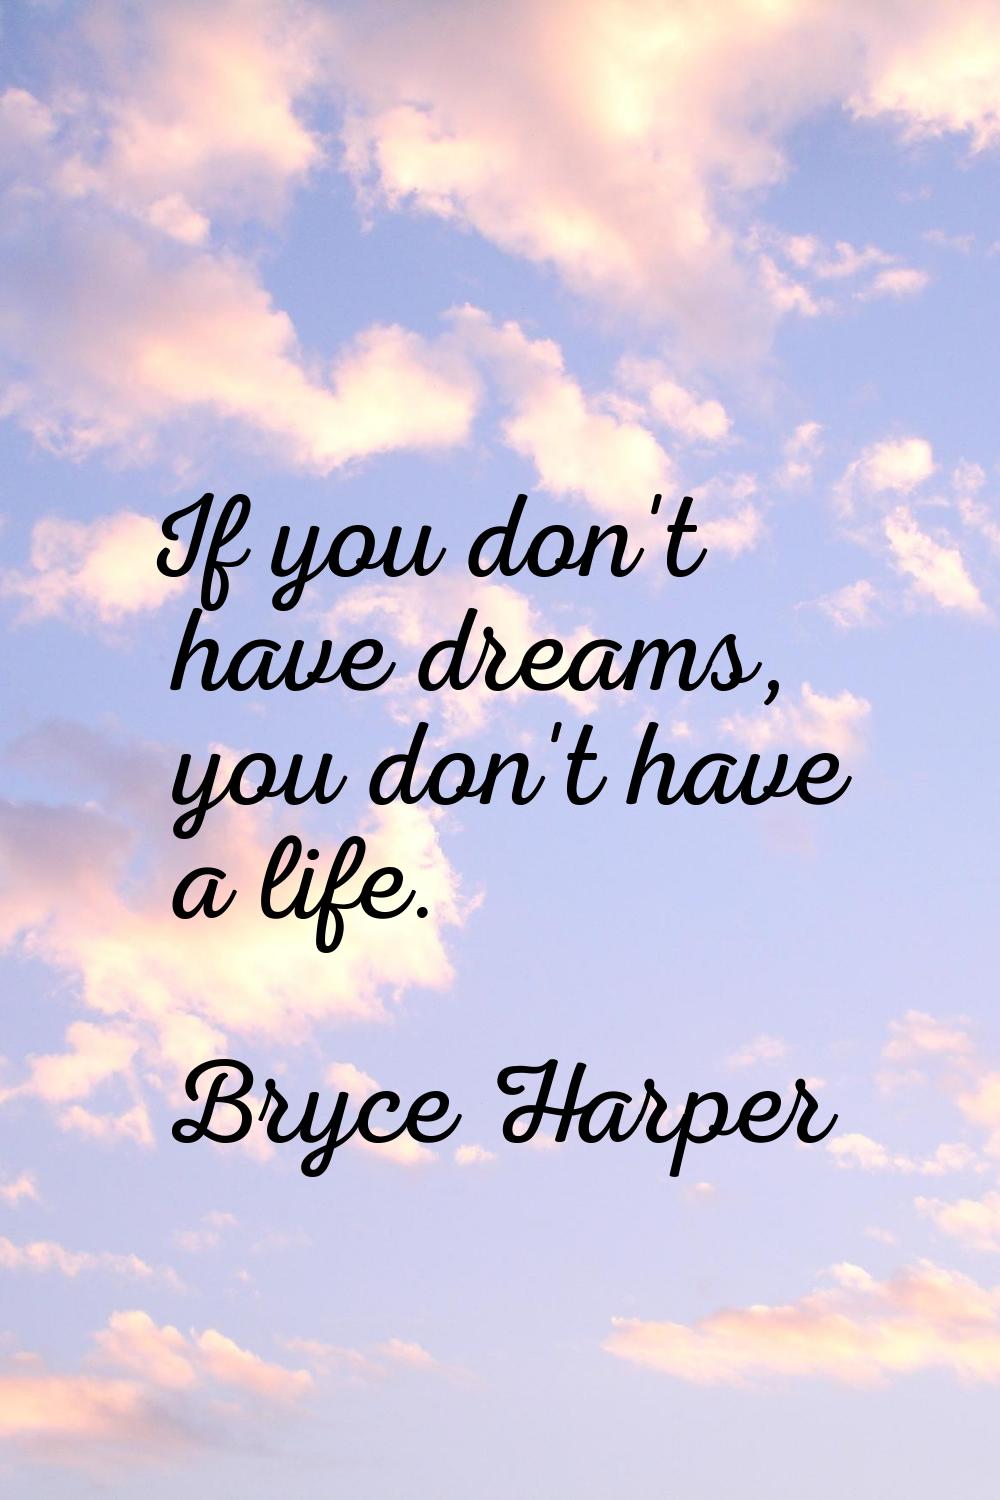 If you don't have dreams, you don't have a life.